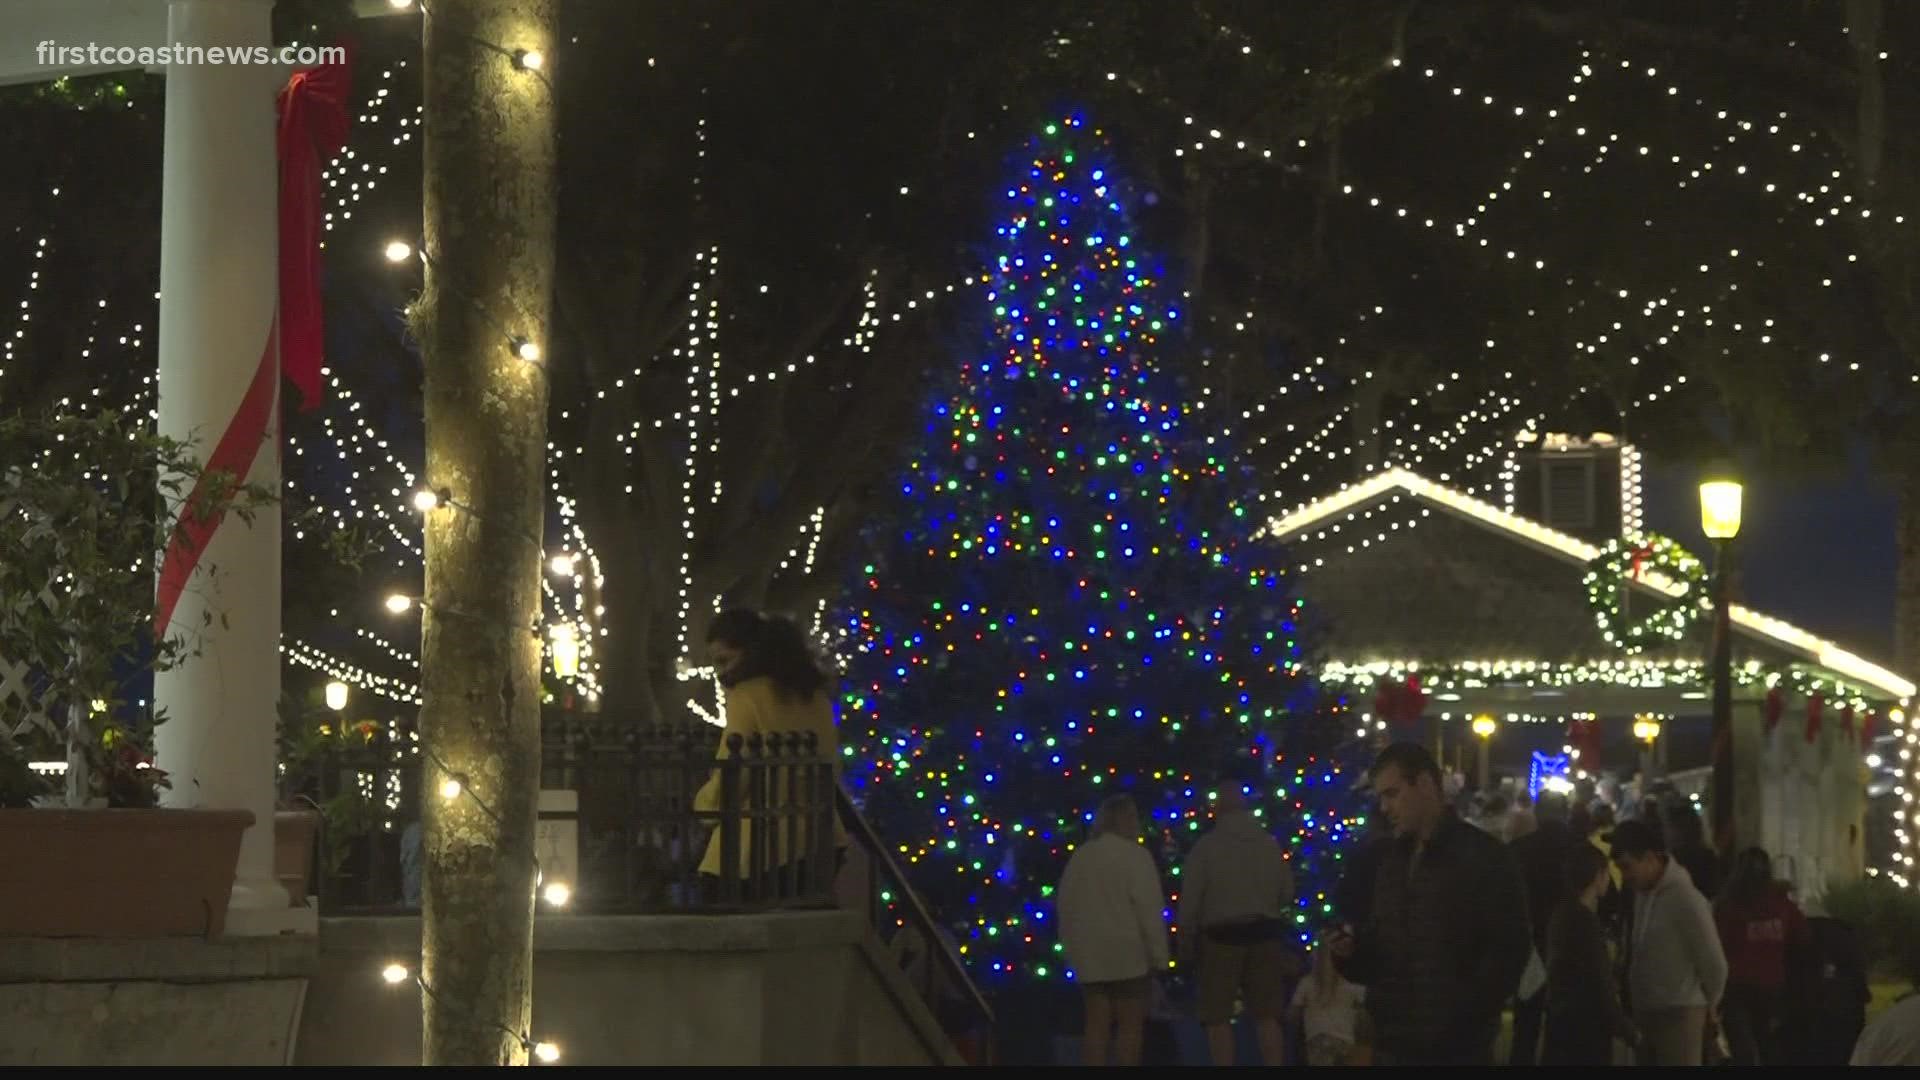 Nights of Lights runs daily through January 2022 in St. Augustine.